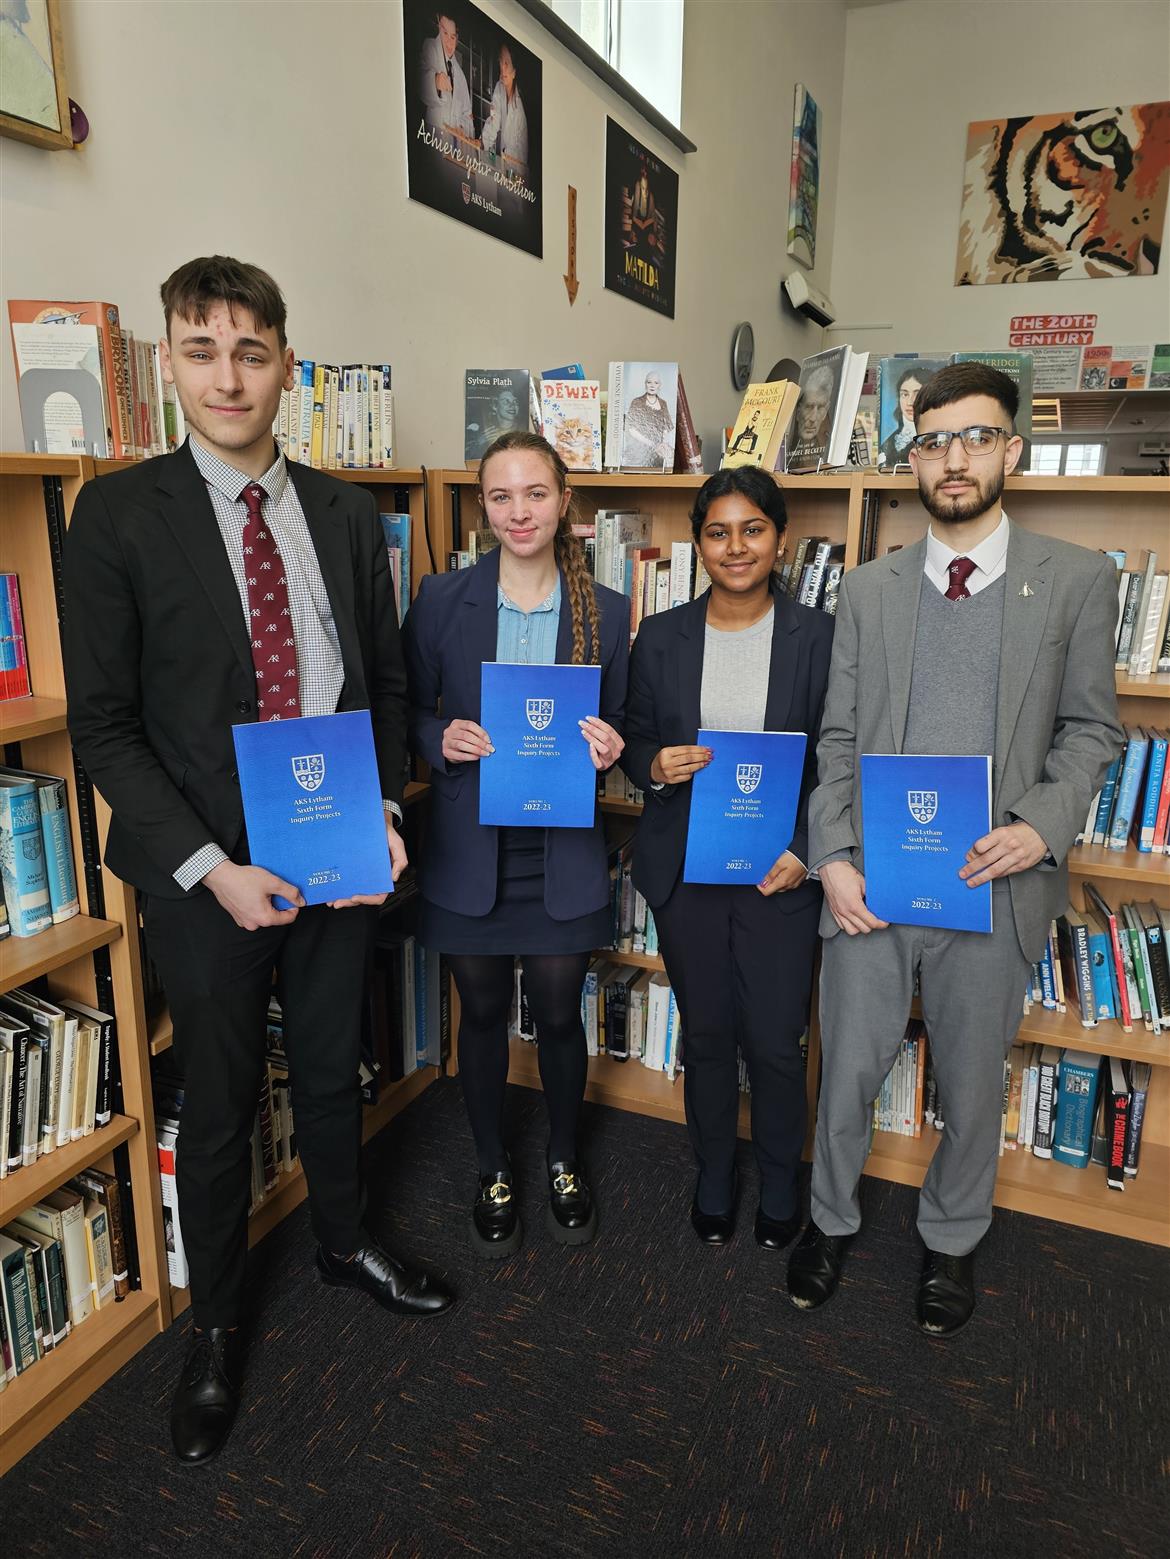 Year 13 students receive Inquiry Learning books